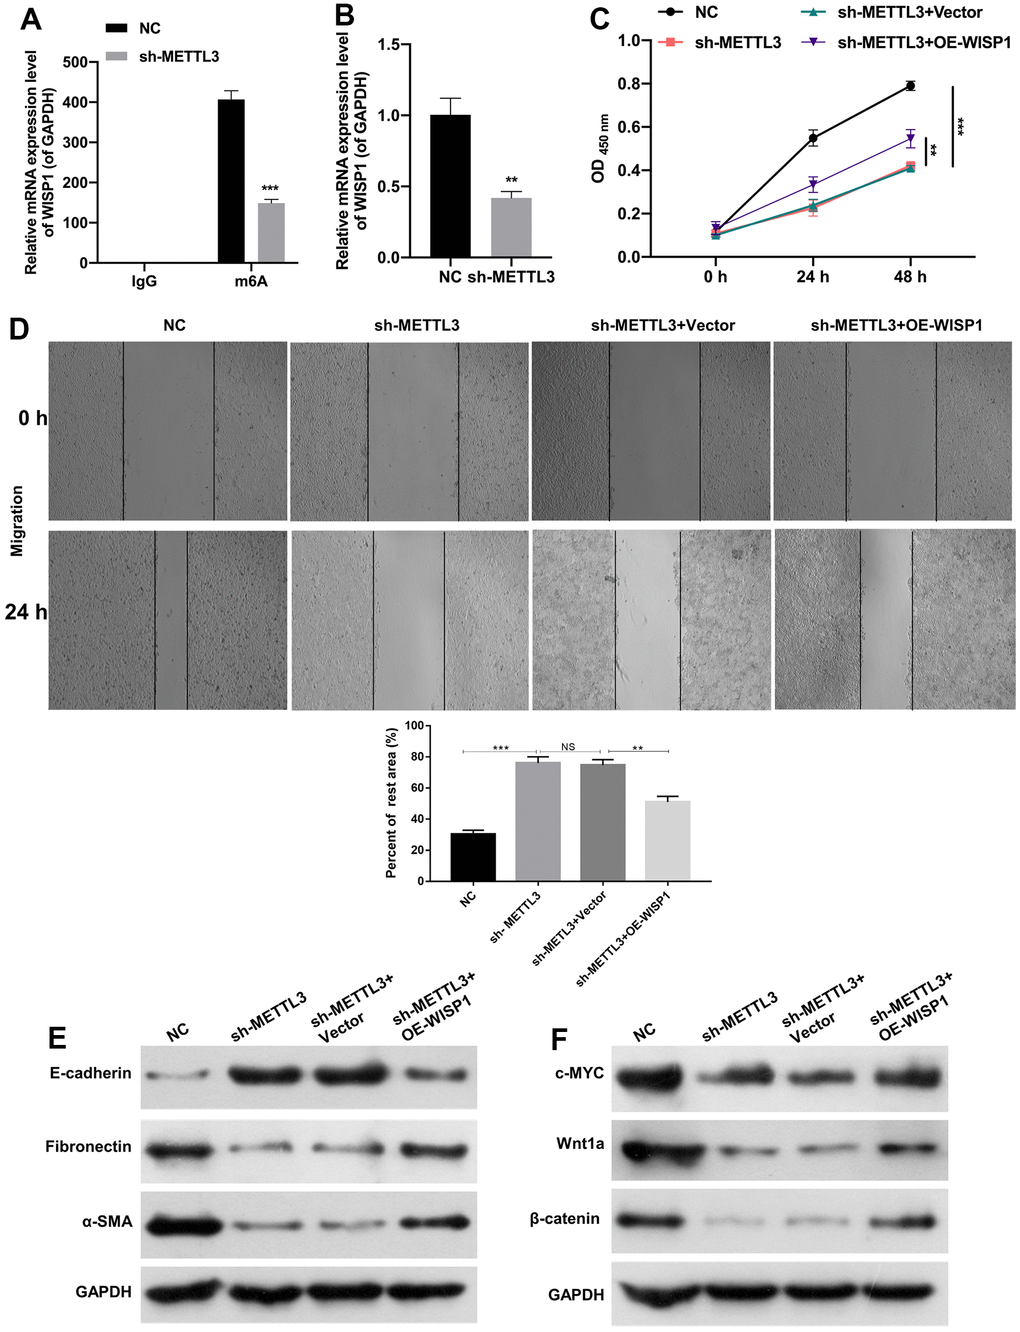 METTL3 silencing prevented EMT progression and fibrosis of HG-induced HK2 cells by decreasing WISP1 with m6A modification. (A) MeRIP-qPCR assay exhibited the change in WISP1 enrichment in HG-treated HK2 cells after METTL3 silencing. (B) WISP1 expression was examined via qRT-PCR in HG-treated HK2 cells which were transfected with METTL3 sh-RNAs. (C) HG-treated HK2 cells were transfected with sh-METTL3 or/and OE-WISP1, and the cell proliferation was tested by CCK-8 assay. (D) Wound healing assay showed the change of cell migration in the processed HK2 cells after HG treatment. (E) E-cadherin, Fibronectin and a-SMA expression levels were assessed by applying western blot. (F) Western blot was adopted to monitor the changes of c-MYC, Wnt1 and β-catenin expressions. **P P 